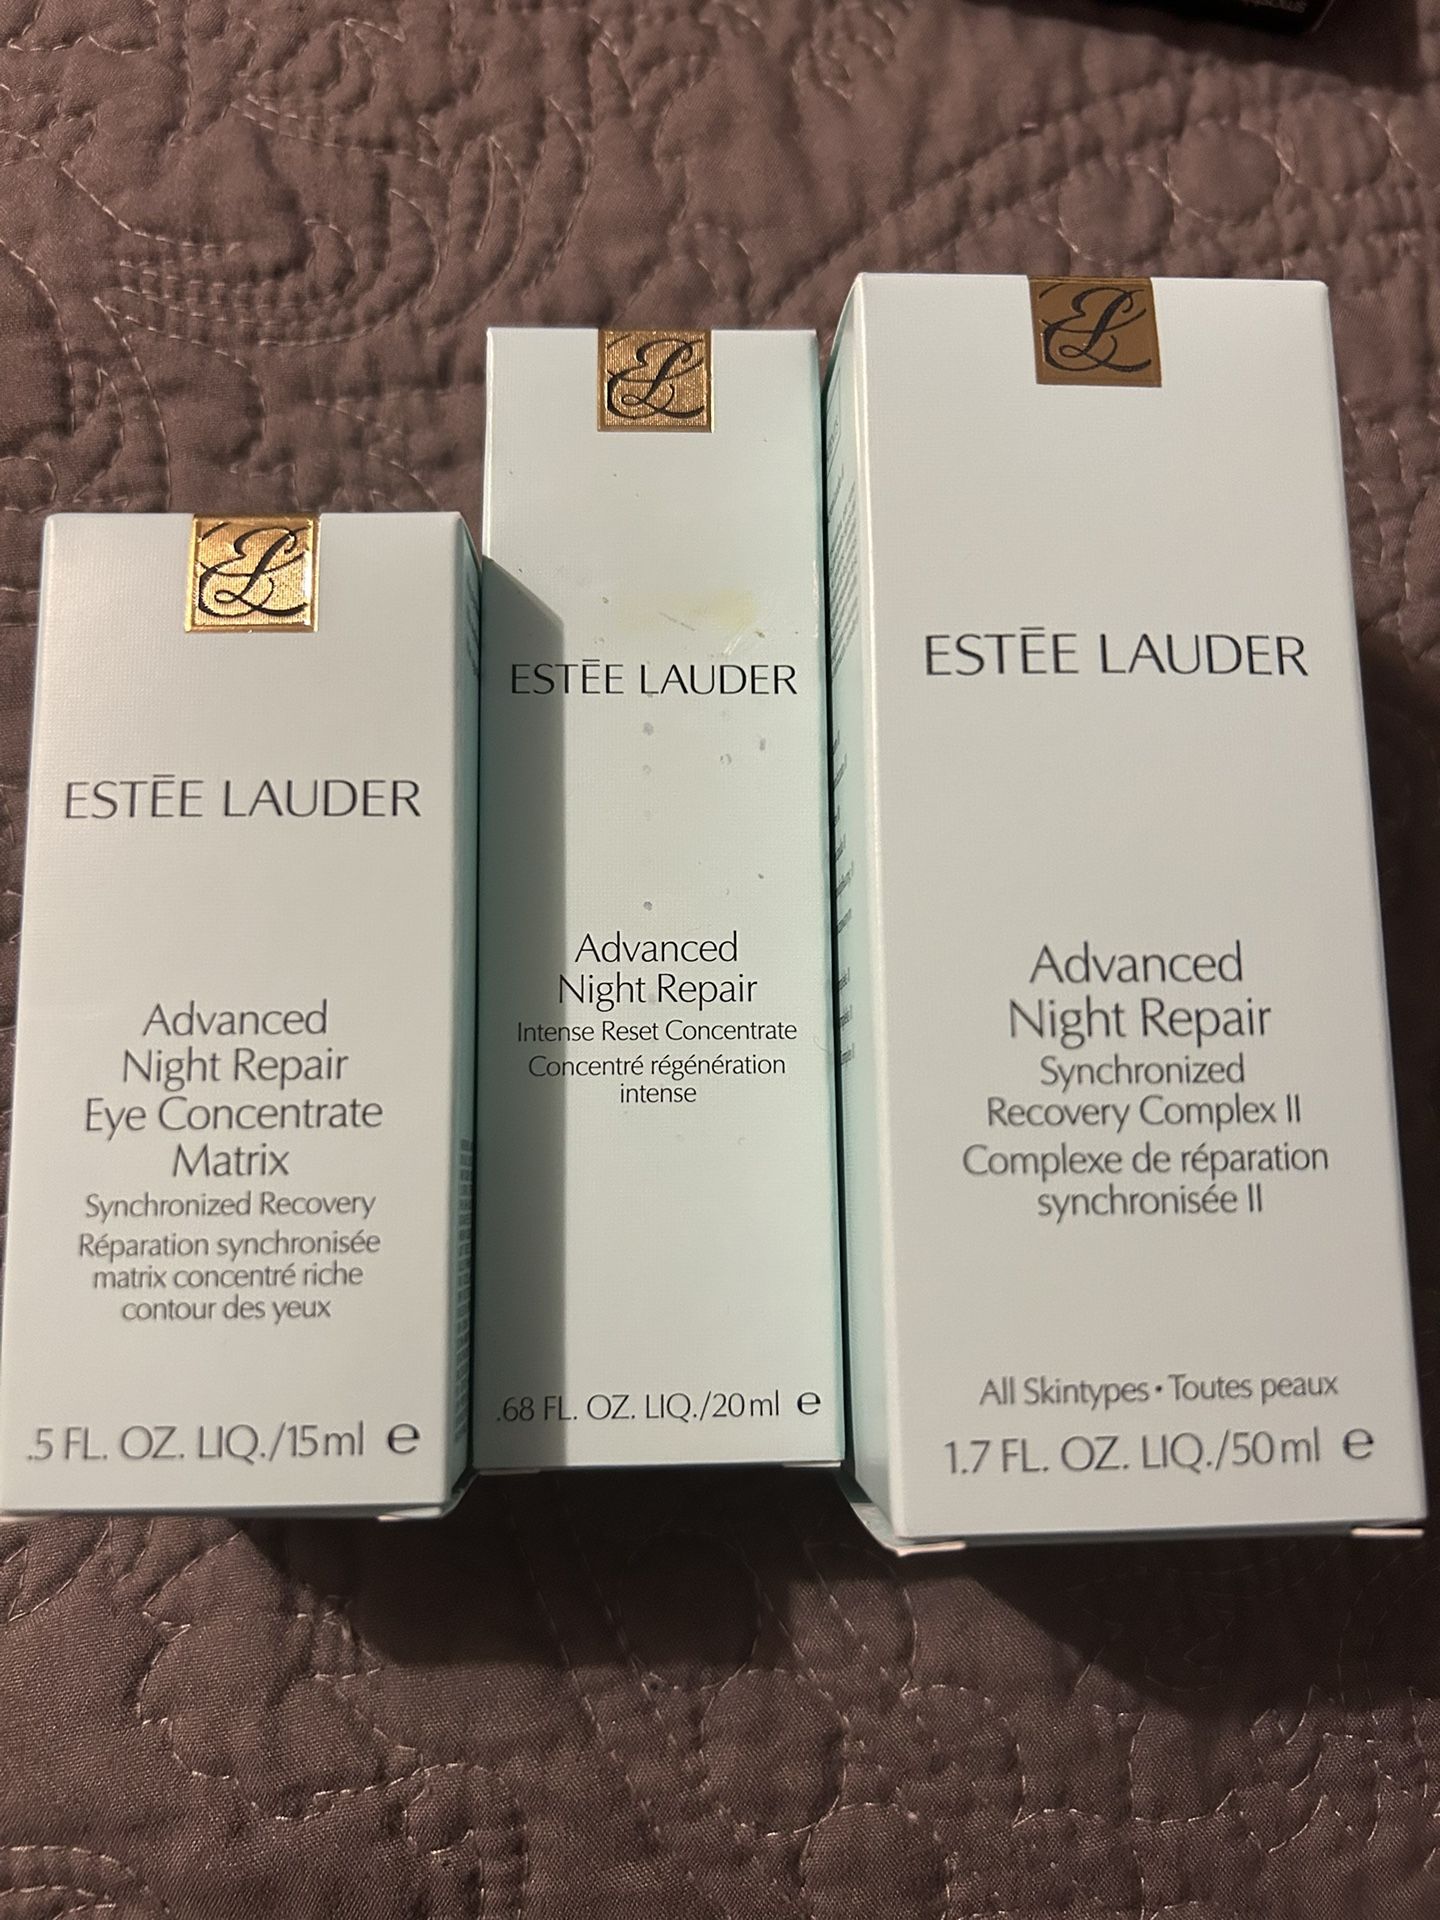  Estée Lauder Advanced Night Repair Set Of 3.  -Eye Concentrate Matrix  - intense reset concentrate  - Synchronized recovery Complex II